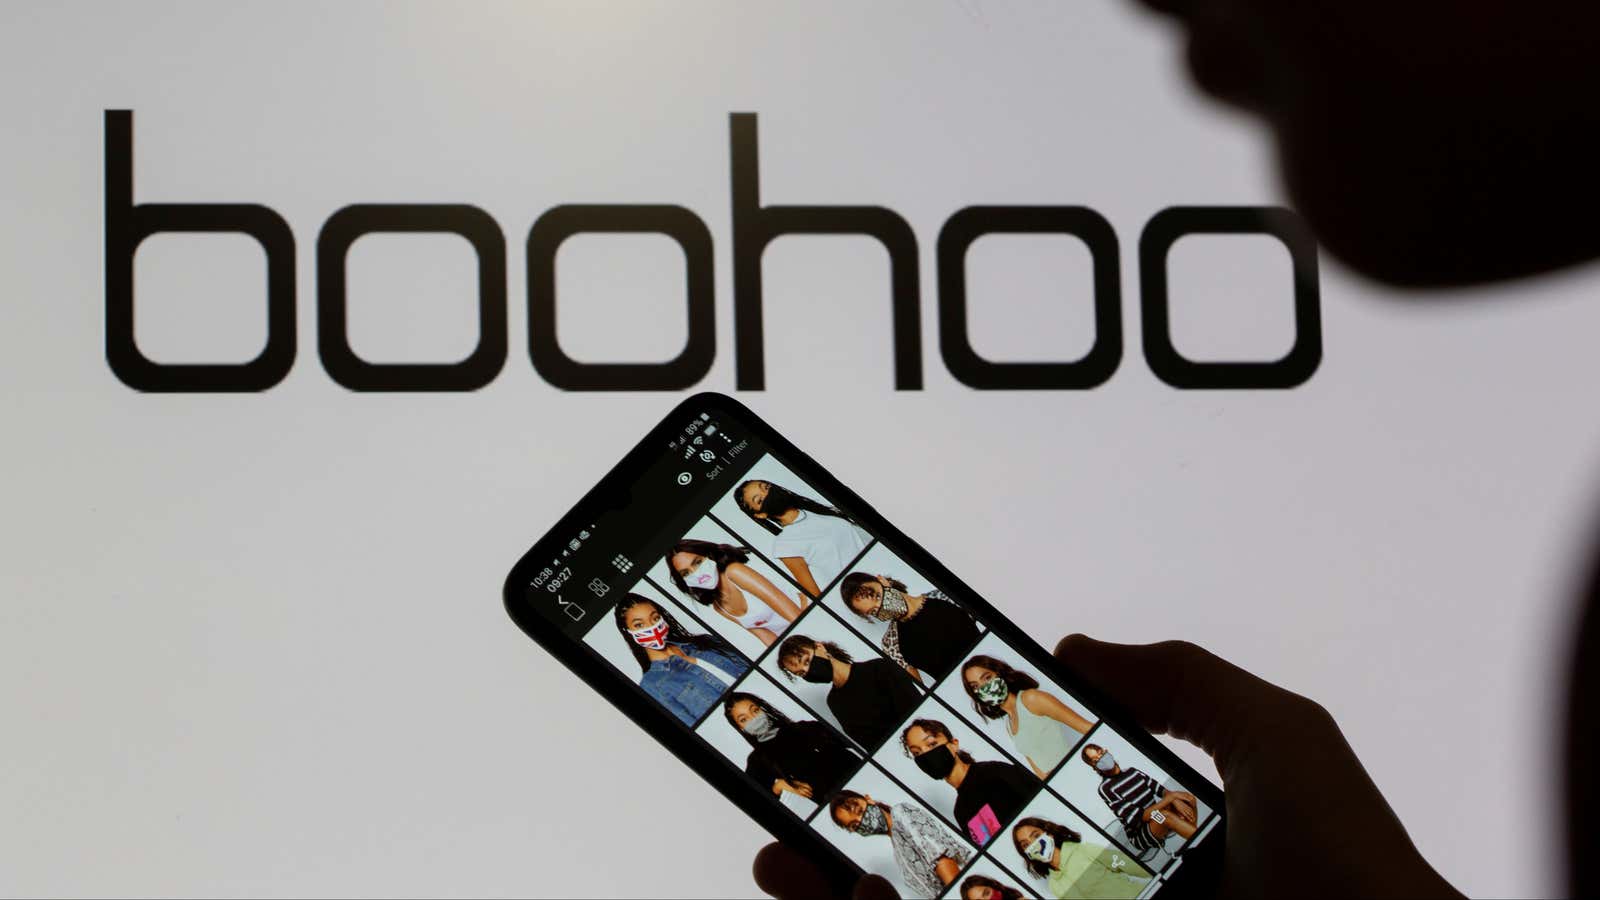 Boohoo to bolster Debenhams stores and e-commerce sites in the